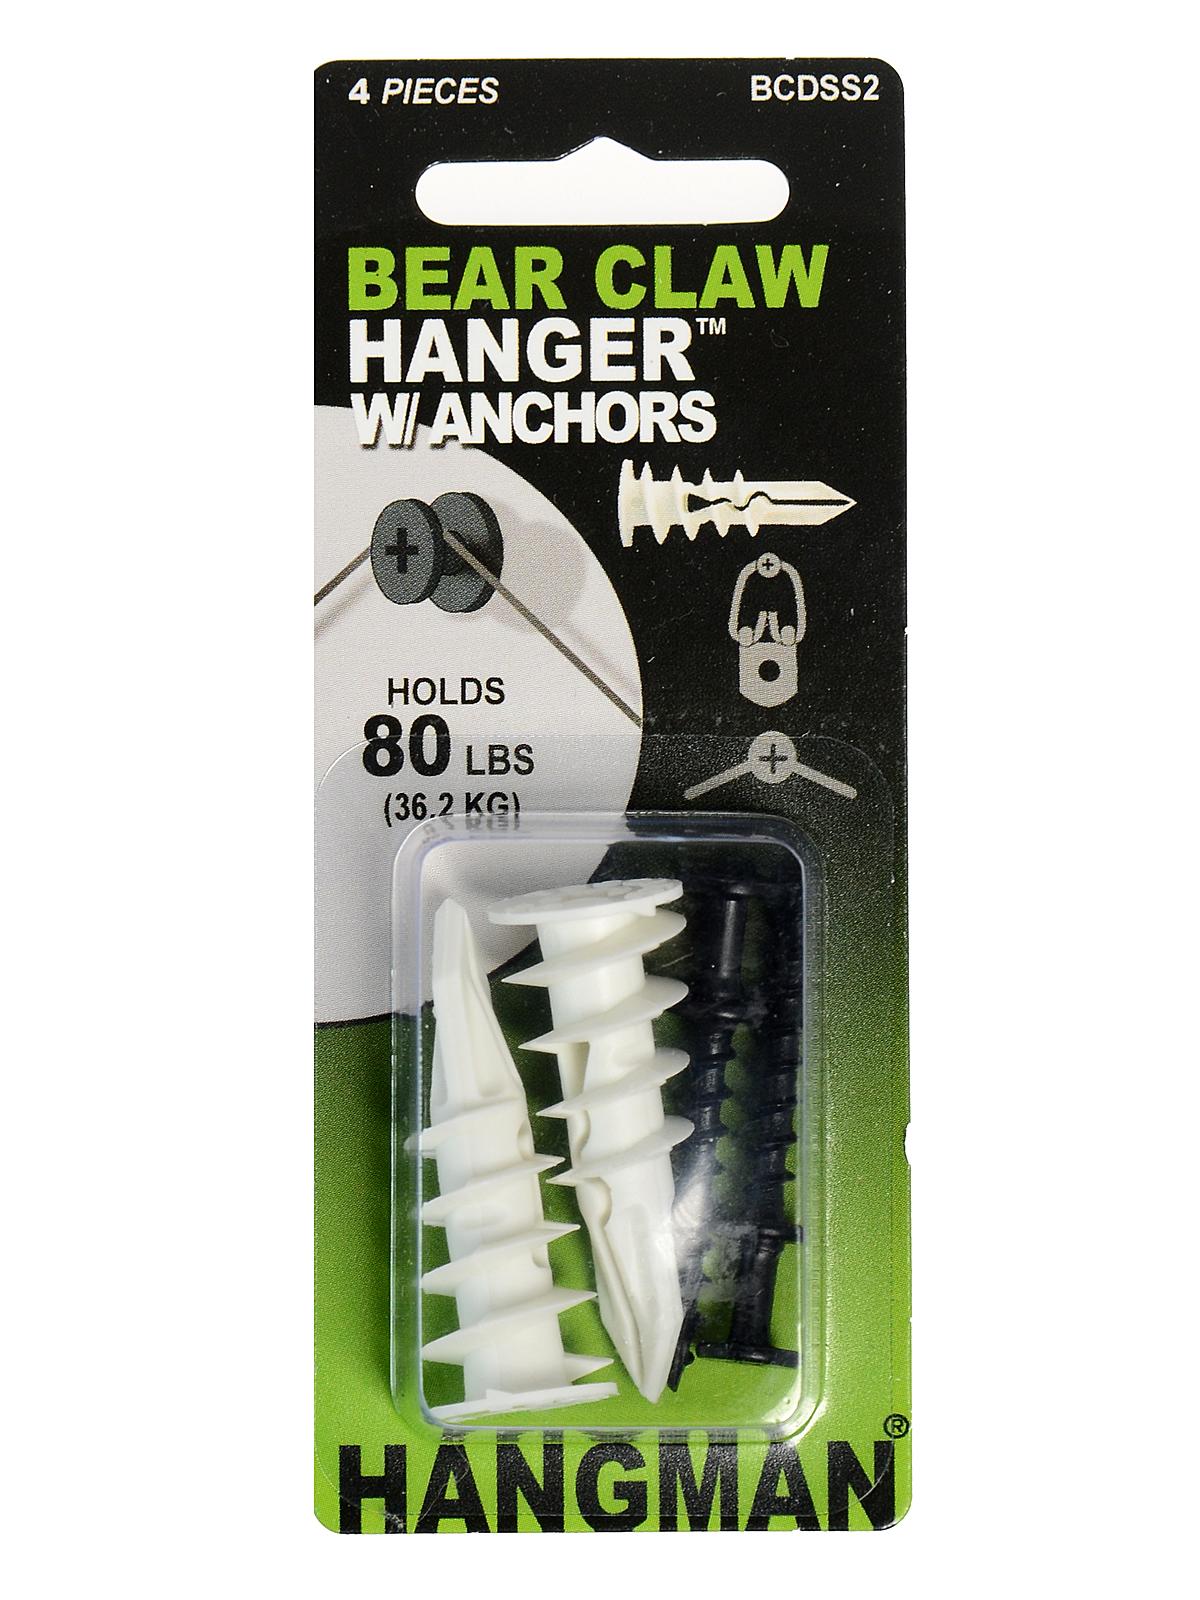 Bearclaw Hanger Hangers And Anchors 1 1 4 In. Pack Of 2